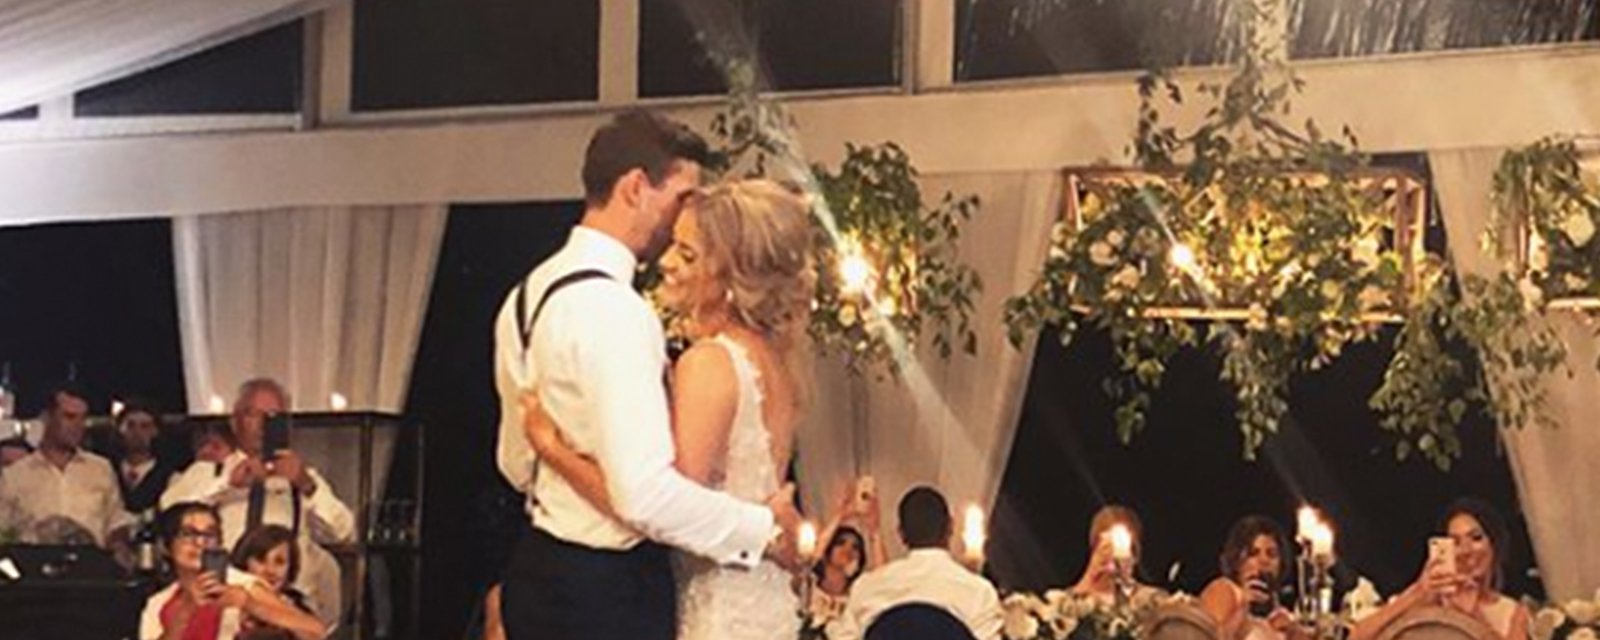 Tavares’ former teammate fires a shot at Leafs star player during his own wedding! 